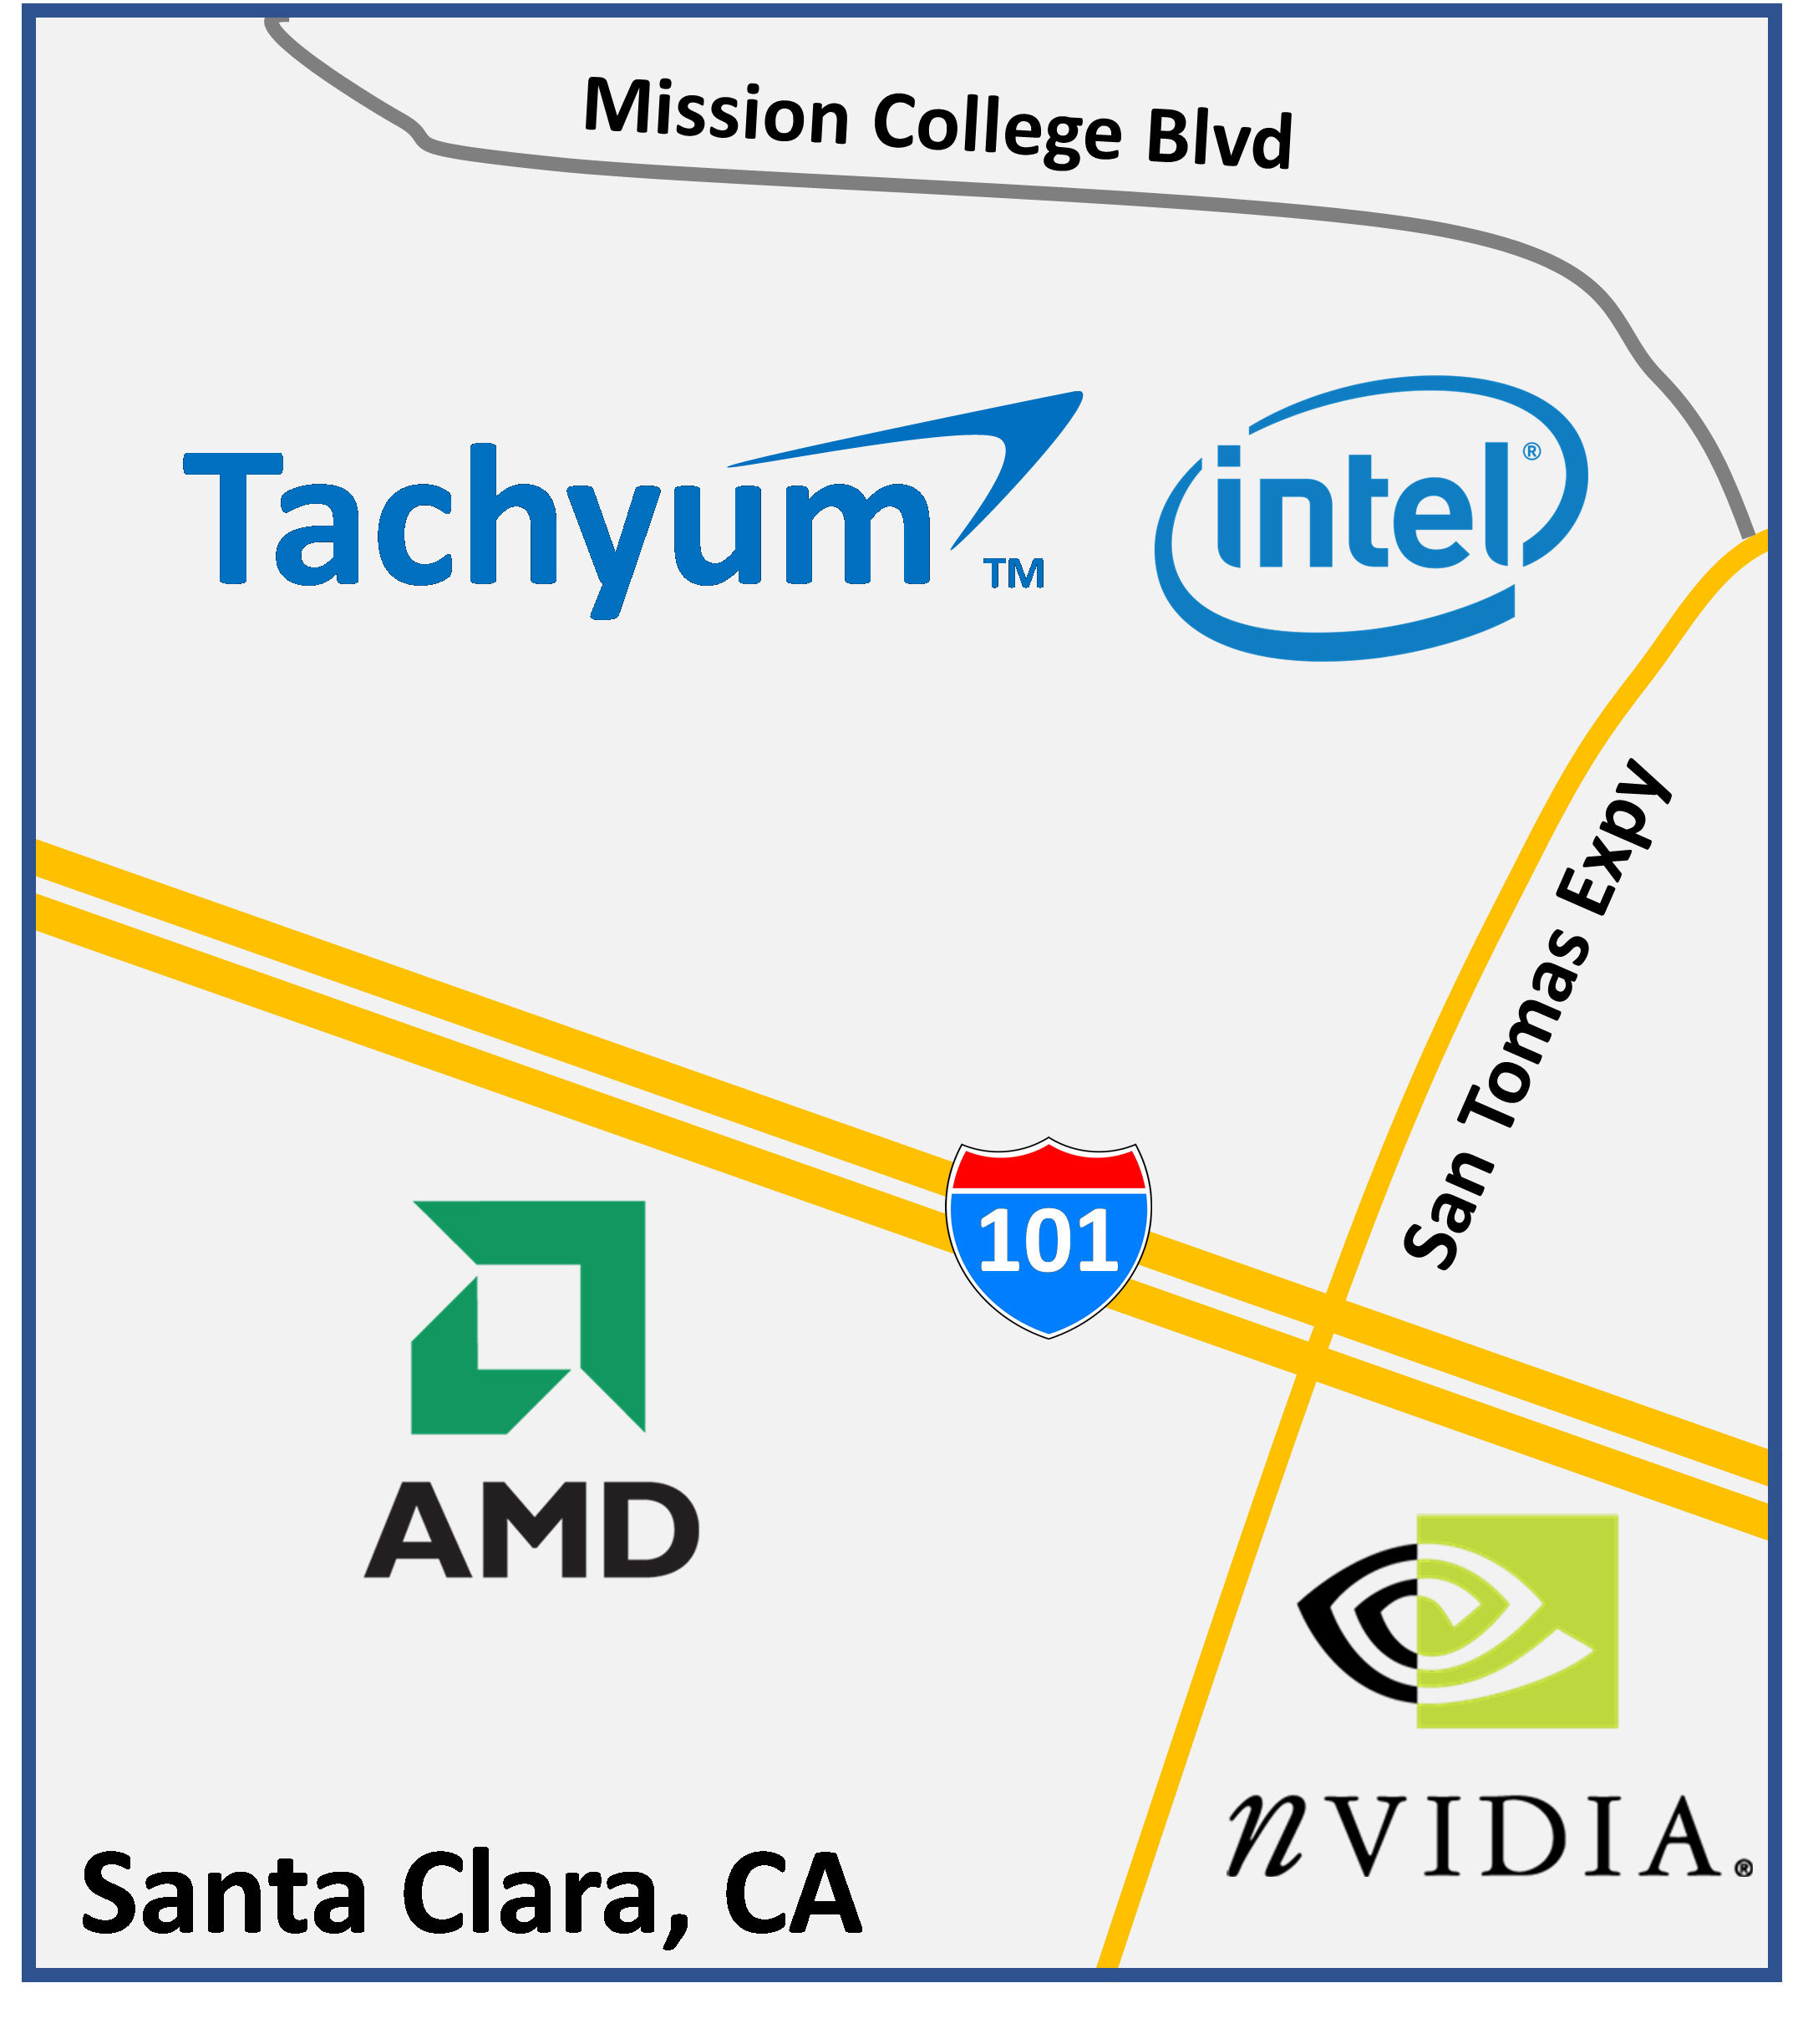 Tachyum Joins Intel Amd And Nvidia With New Headquarters In Santa Clara Business Wire